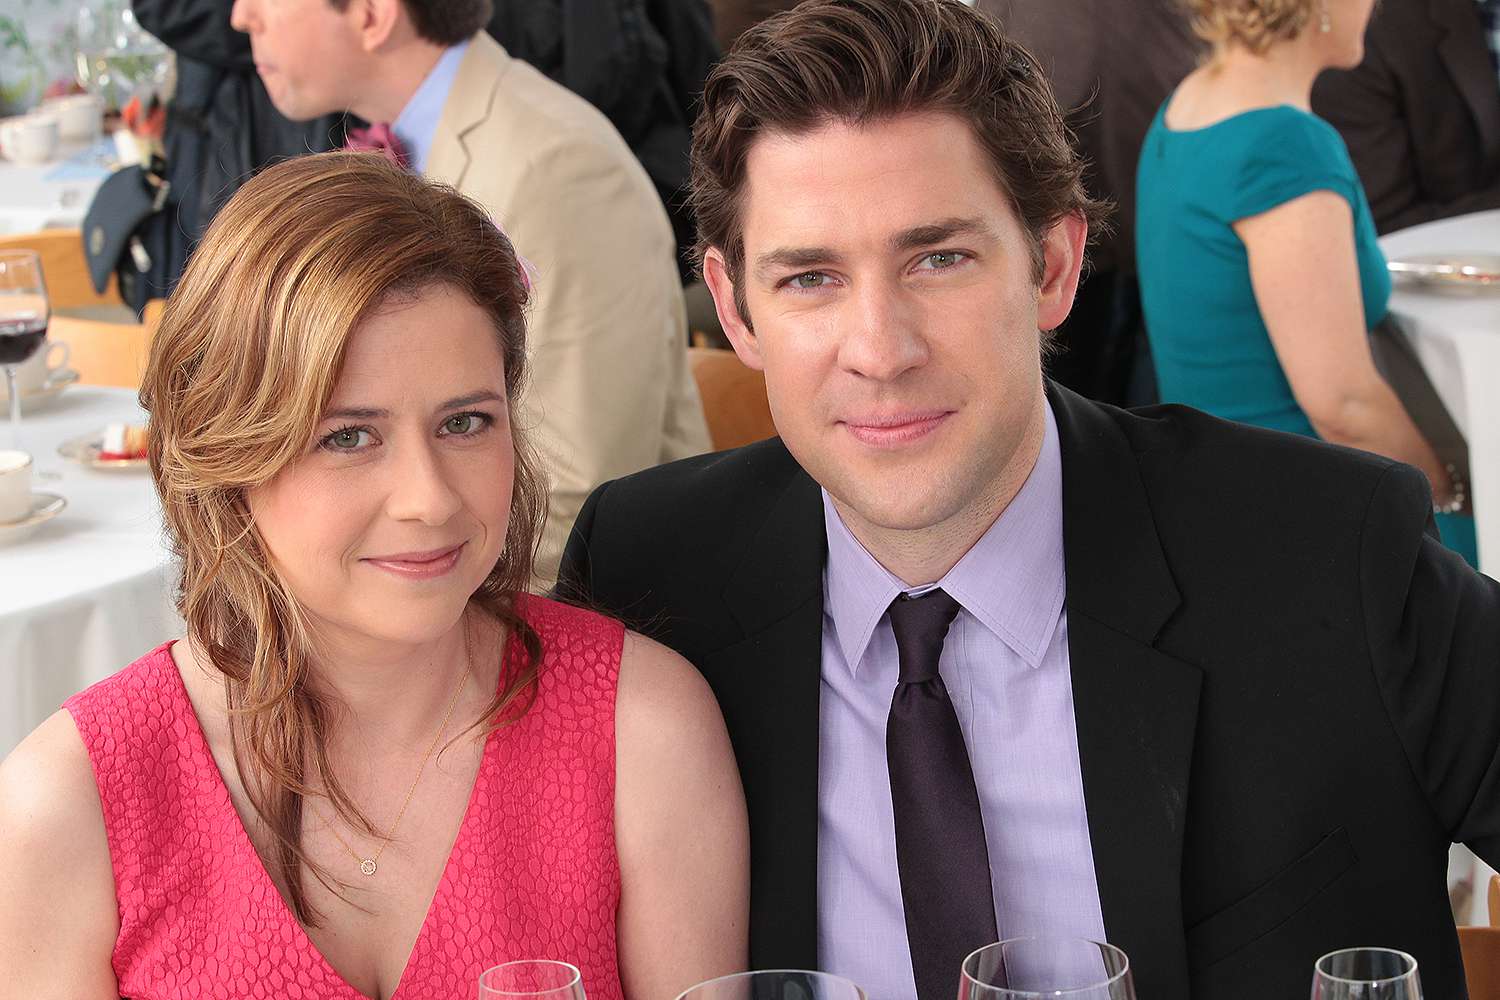 5. They Are Unhealthily Codependent Jim Halpert didn't ask much from Pam when he wanted to do something he had been dreaming about since he was a sophomore. He wanted to travel and meet his basketball heroes, but Pam was a tad bit over-obsessive which ultimately proved that she didn't trust him or maybe didn't want him happy. Chaining someone to commit to a relationship can never work in real life. They addressed this issue towards the end, but a non-sitcom man can harbor some serious issues over this heartbreak that could be fatal for a marriage.